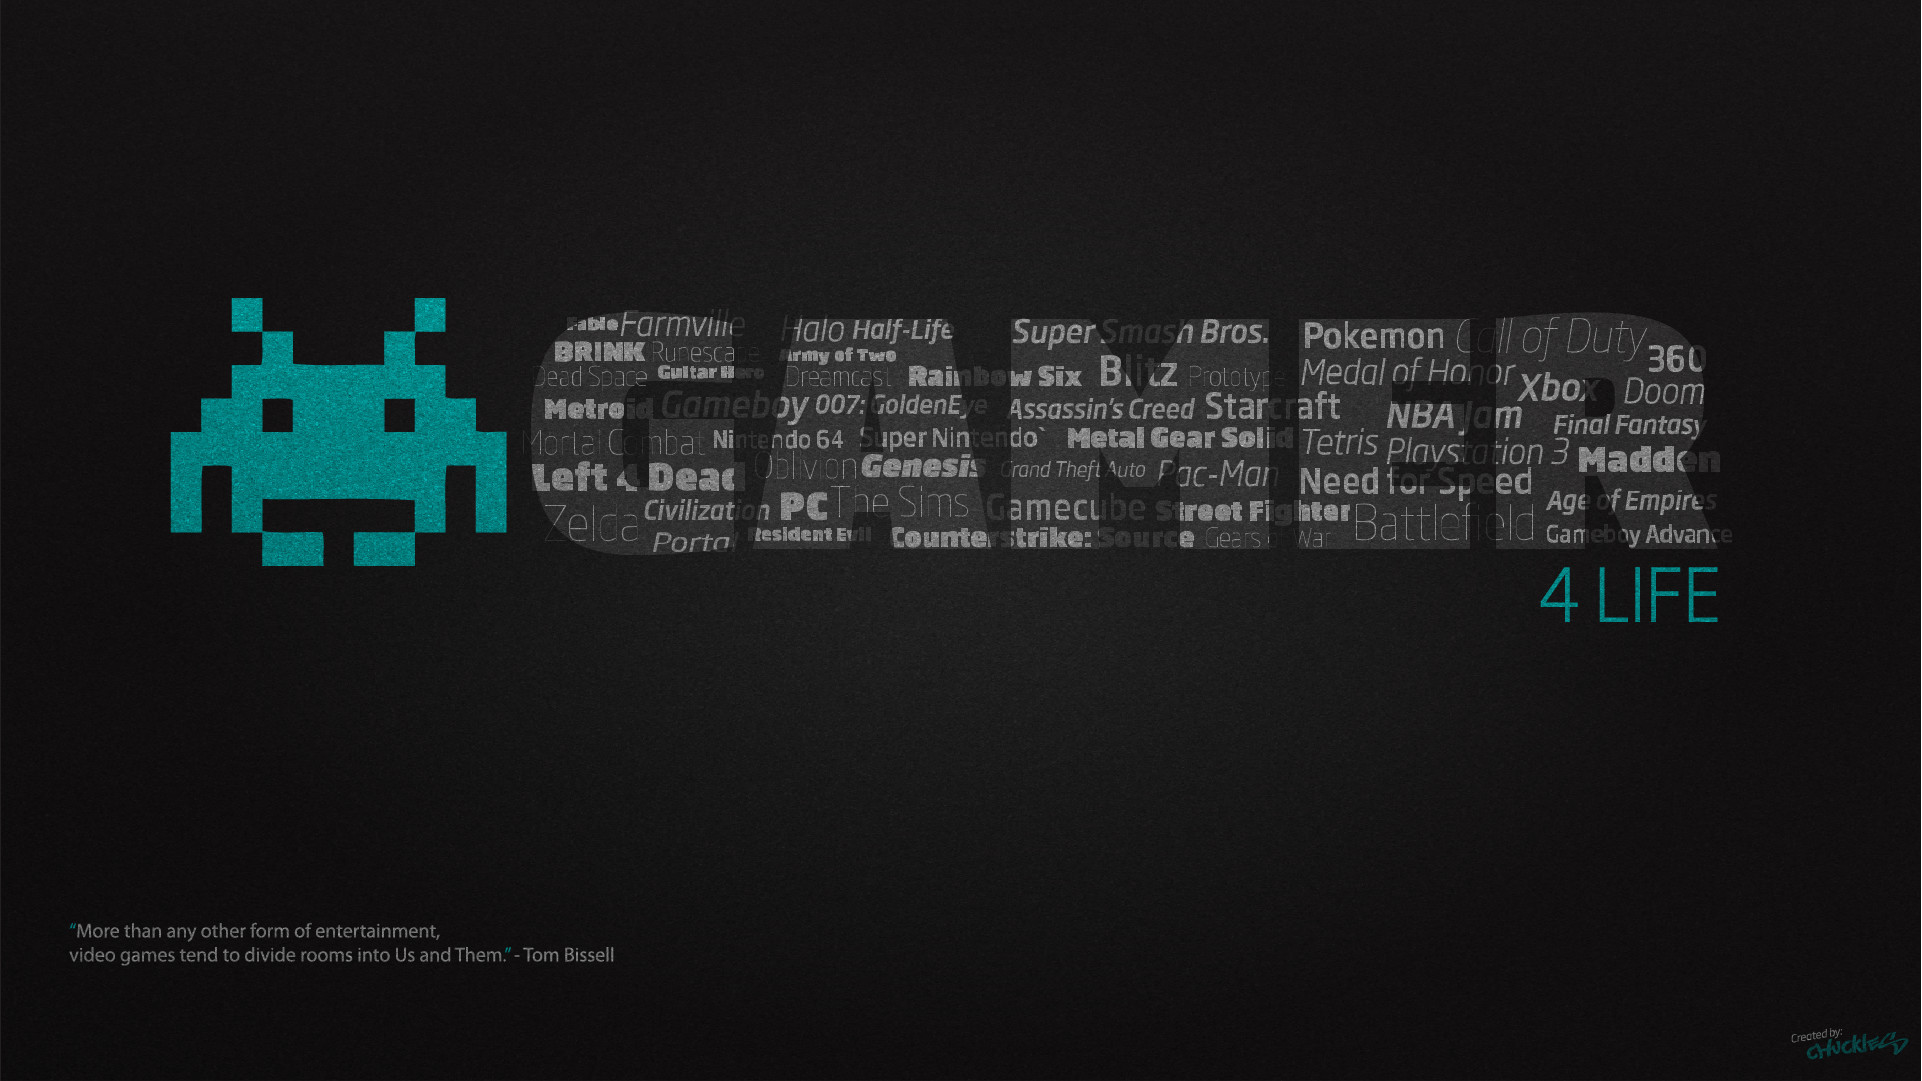 1922x1081  Gamer for Life Desktop Wallpaper 1920x1080 by ChucklesMedia on .